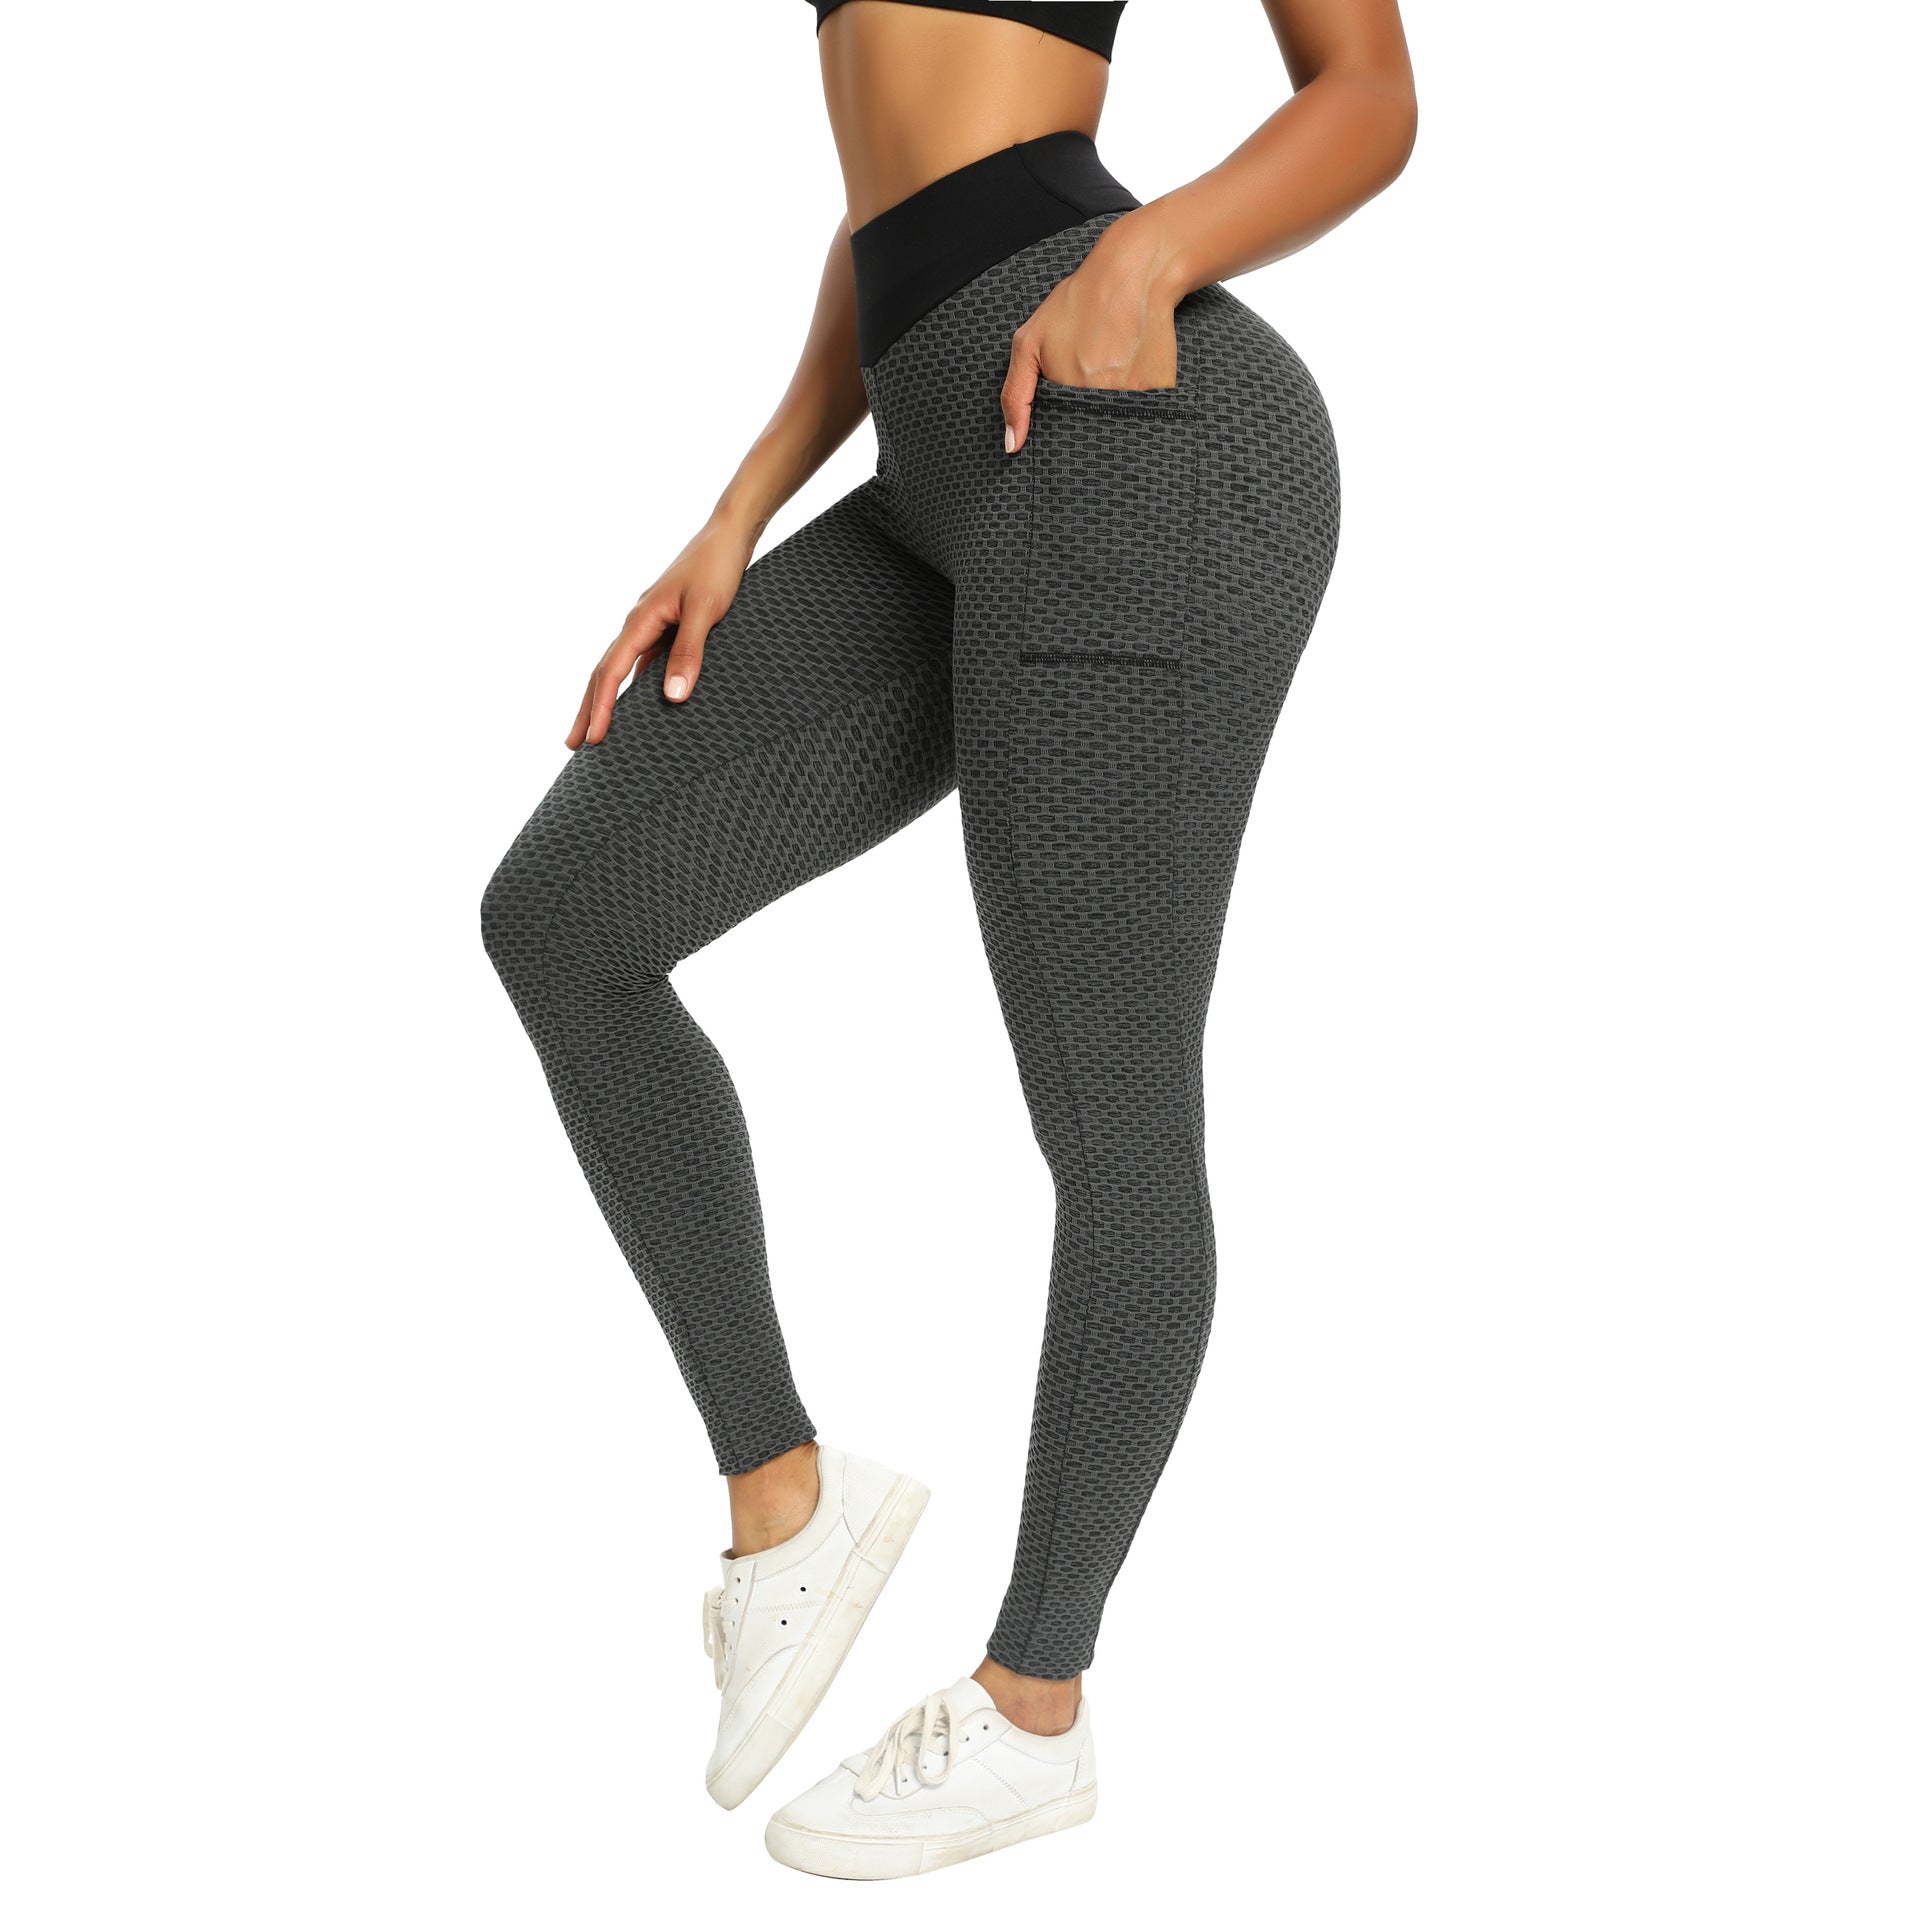 Women's Honeycomb Bubble Ninth Pants with Pockets Sports Fitness Running Yoga Clothes 9776